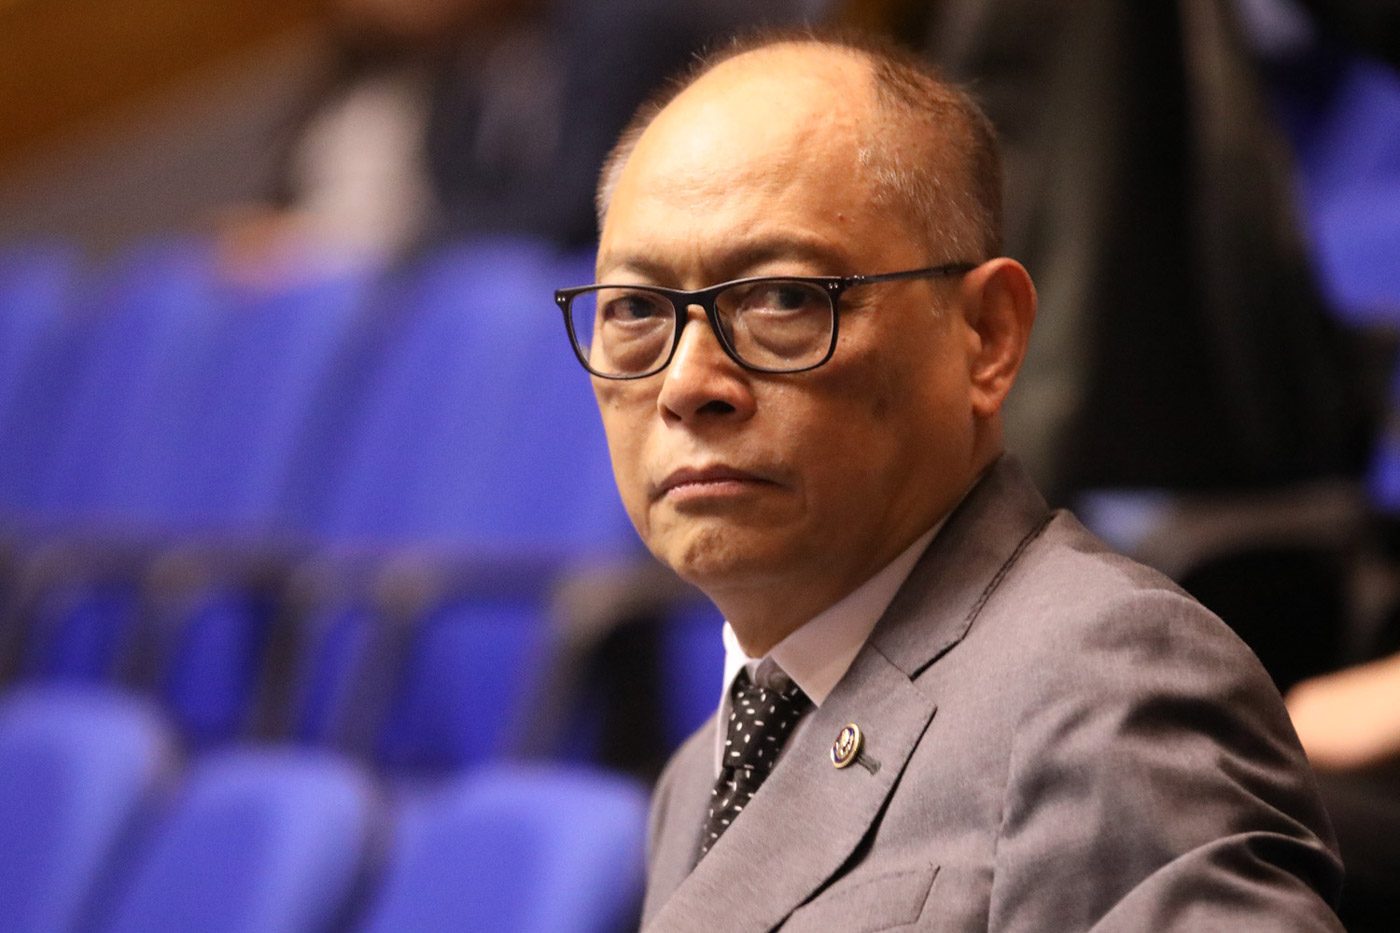 Arroyo as next finance or budget chief? Diokno says ‘all speculation’